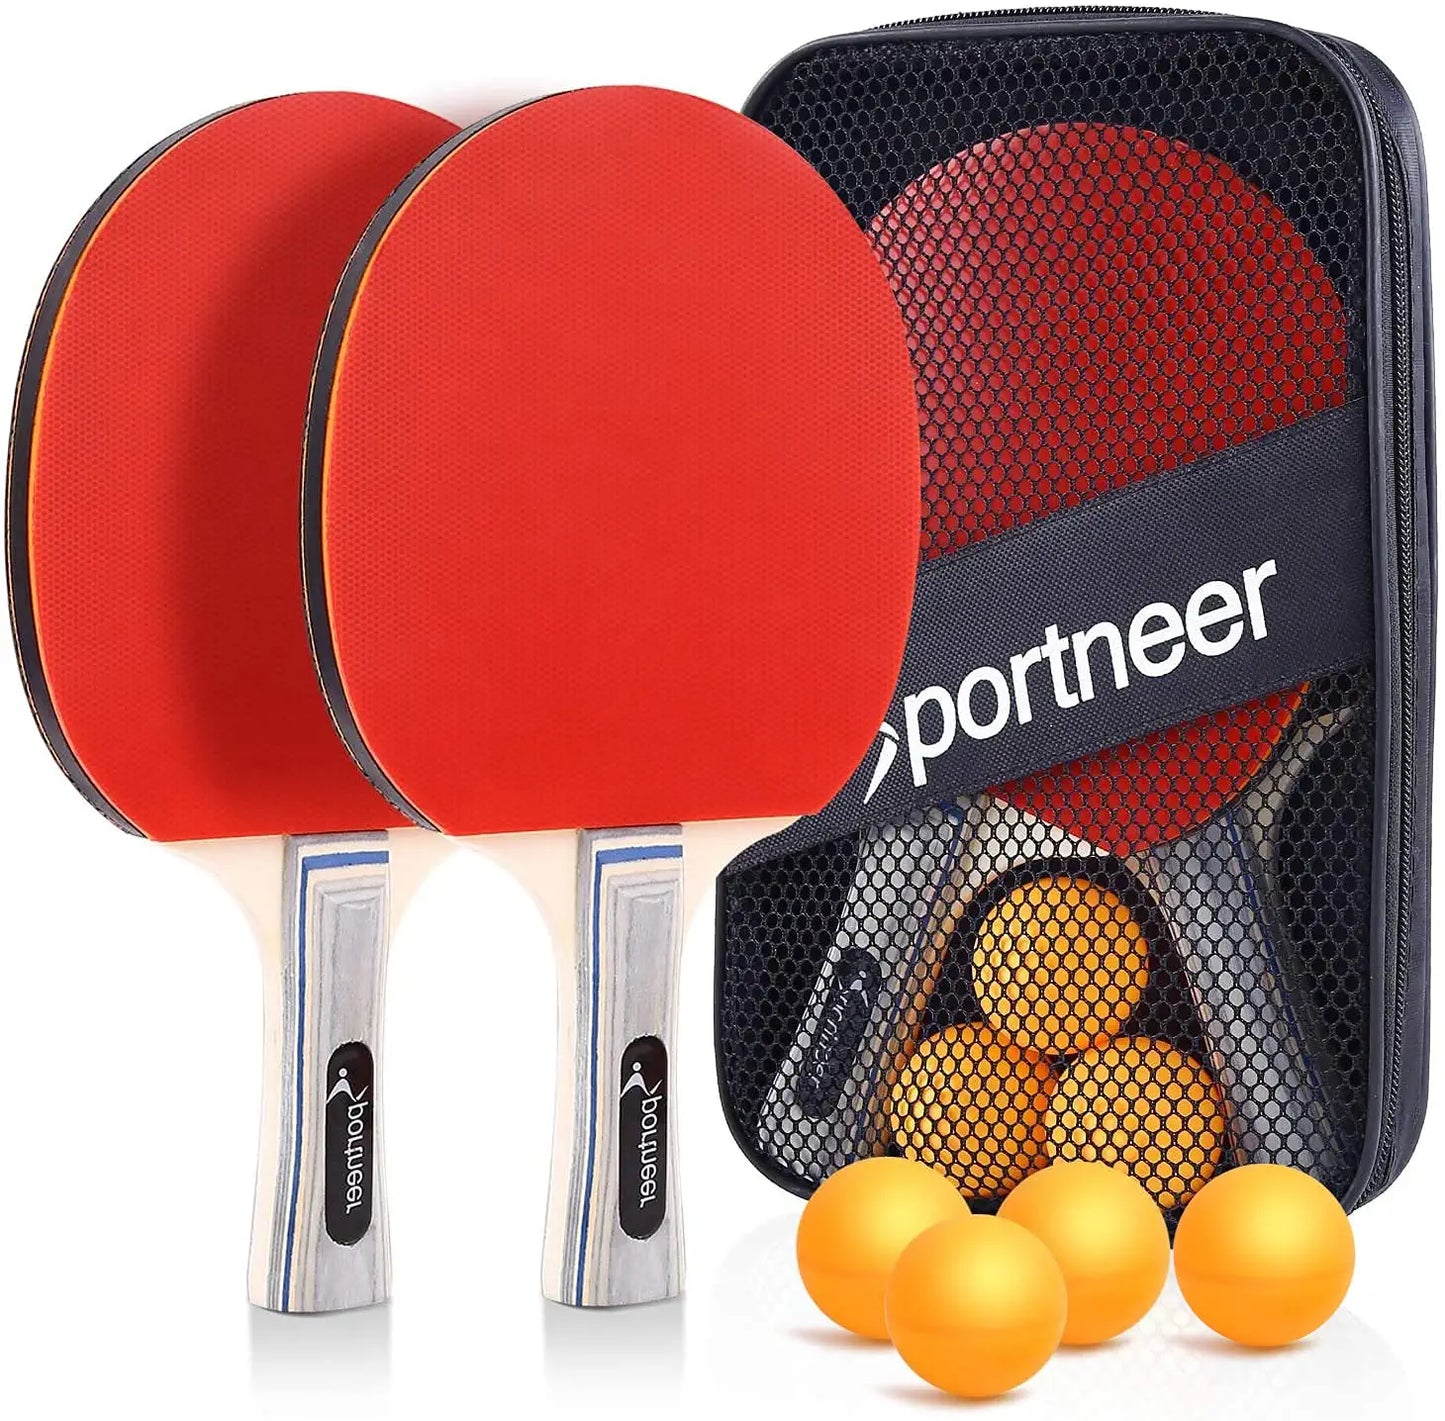 Table Tennis Bat Set Red and Black, Double-Sided Table Tennis Racket Set for Children Adult (4 Balls)